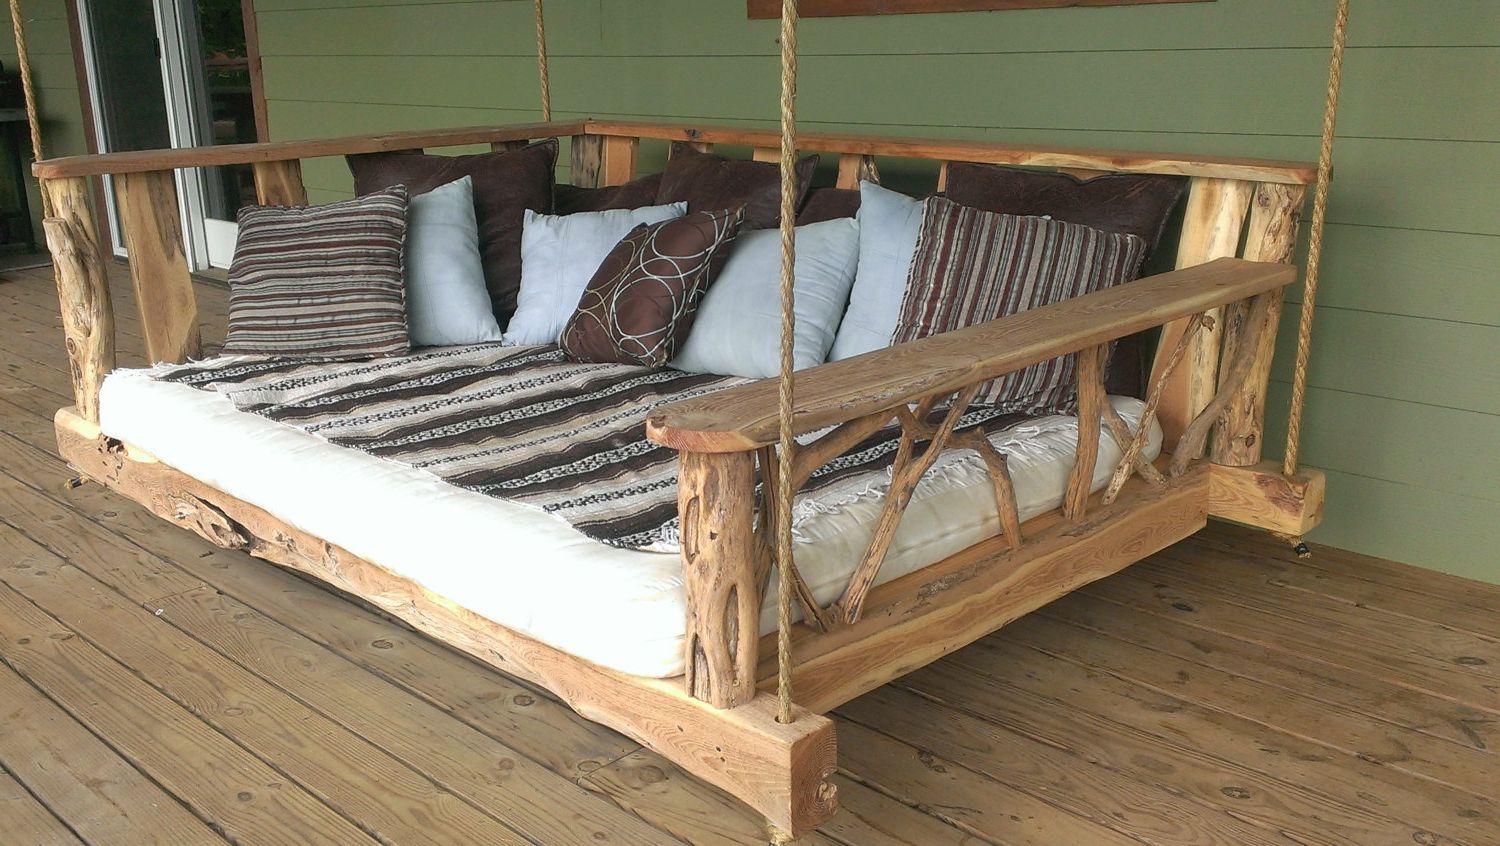 Most Recent Daybed Porch Swings With Stand Intended For 15 Custom Handcrafted Porch Swing Designs – Style Motivation (View 12 of 25)